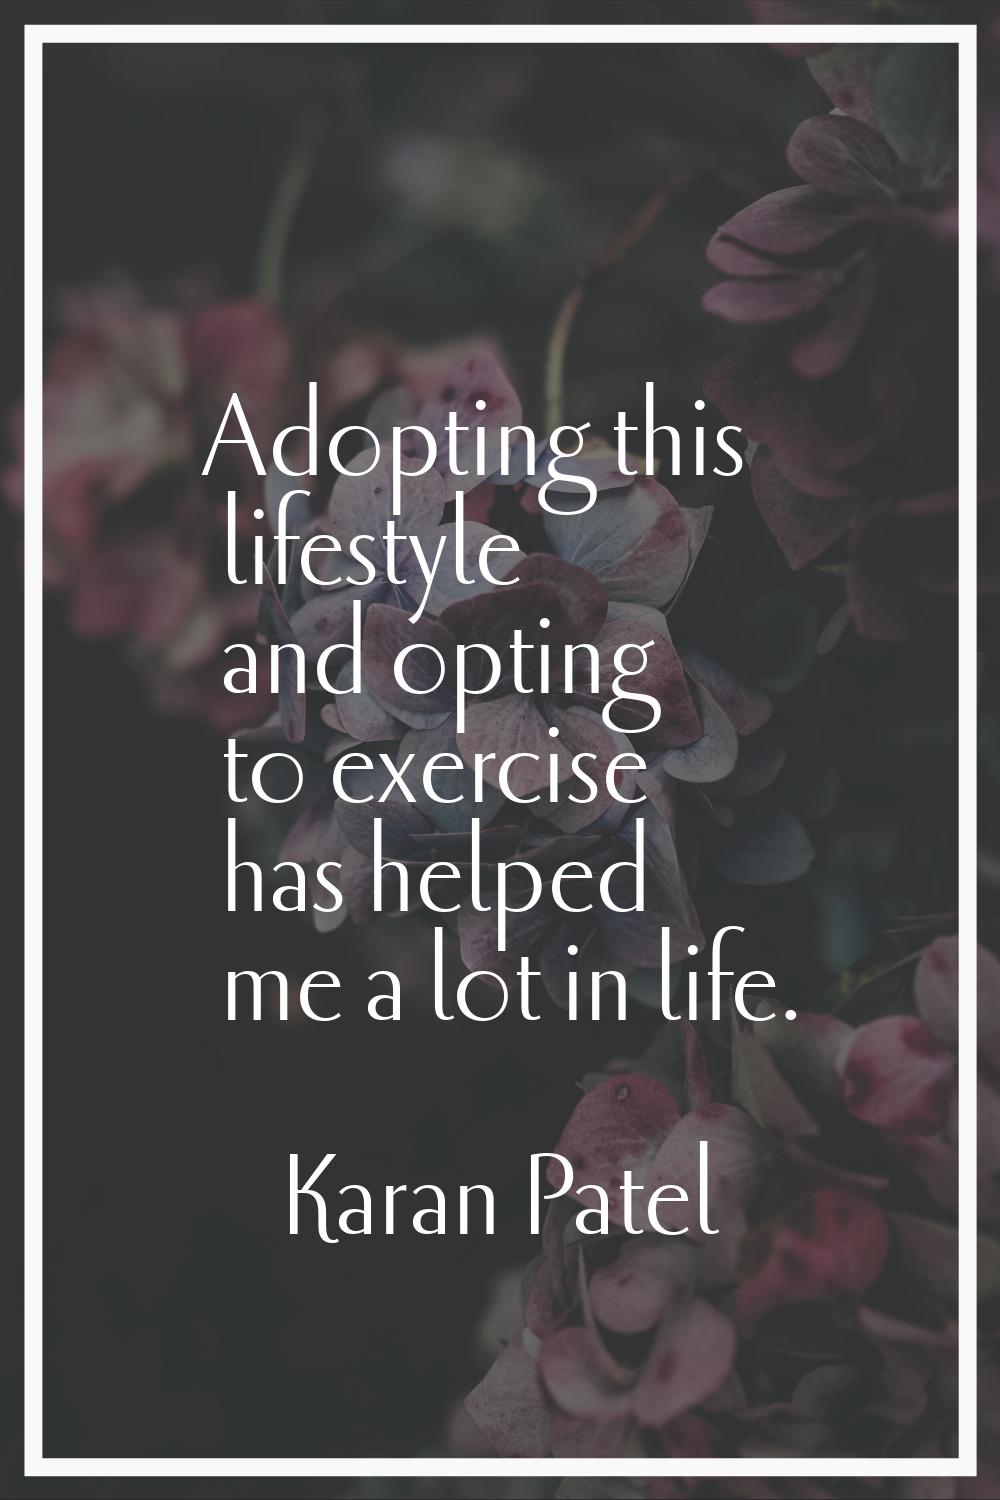 Adopting this lifestyle and opting to exercise has helped me a lot in life.